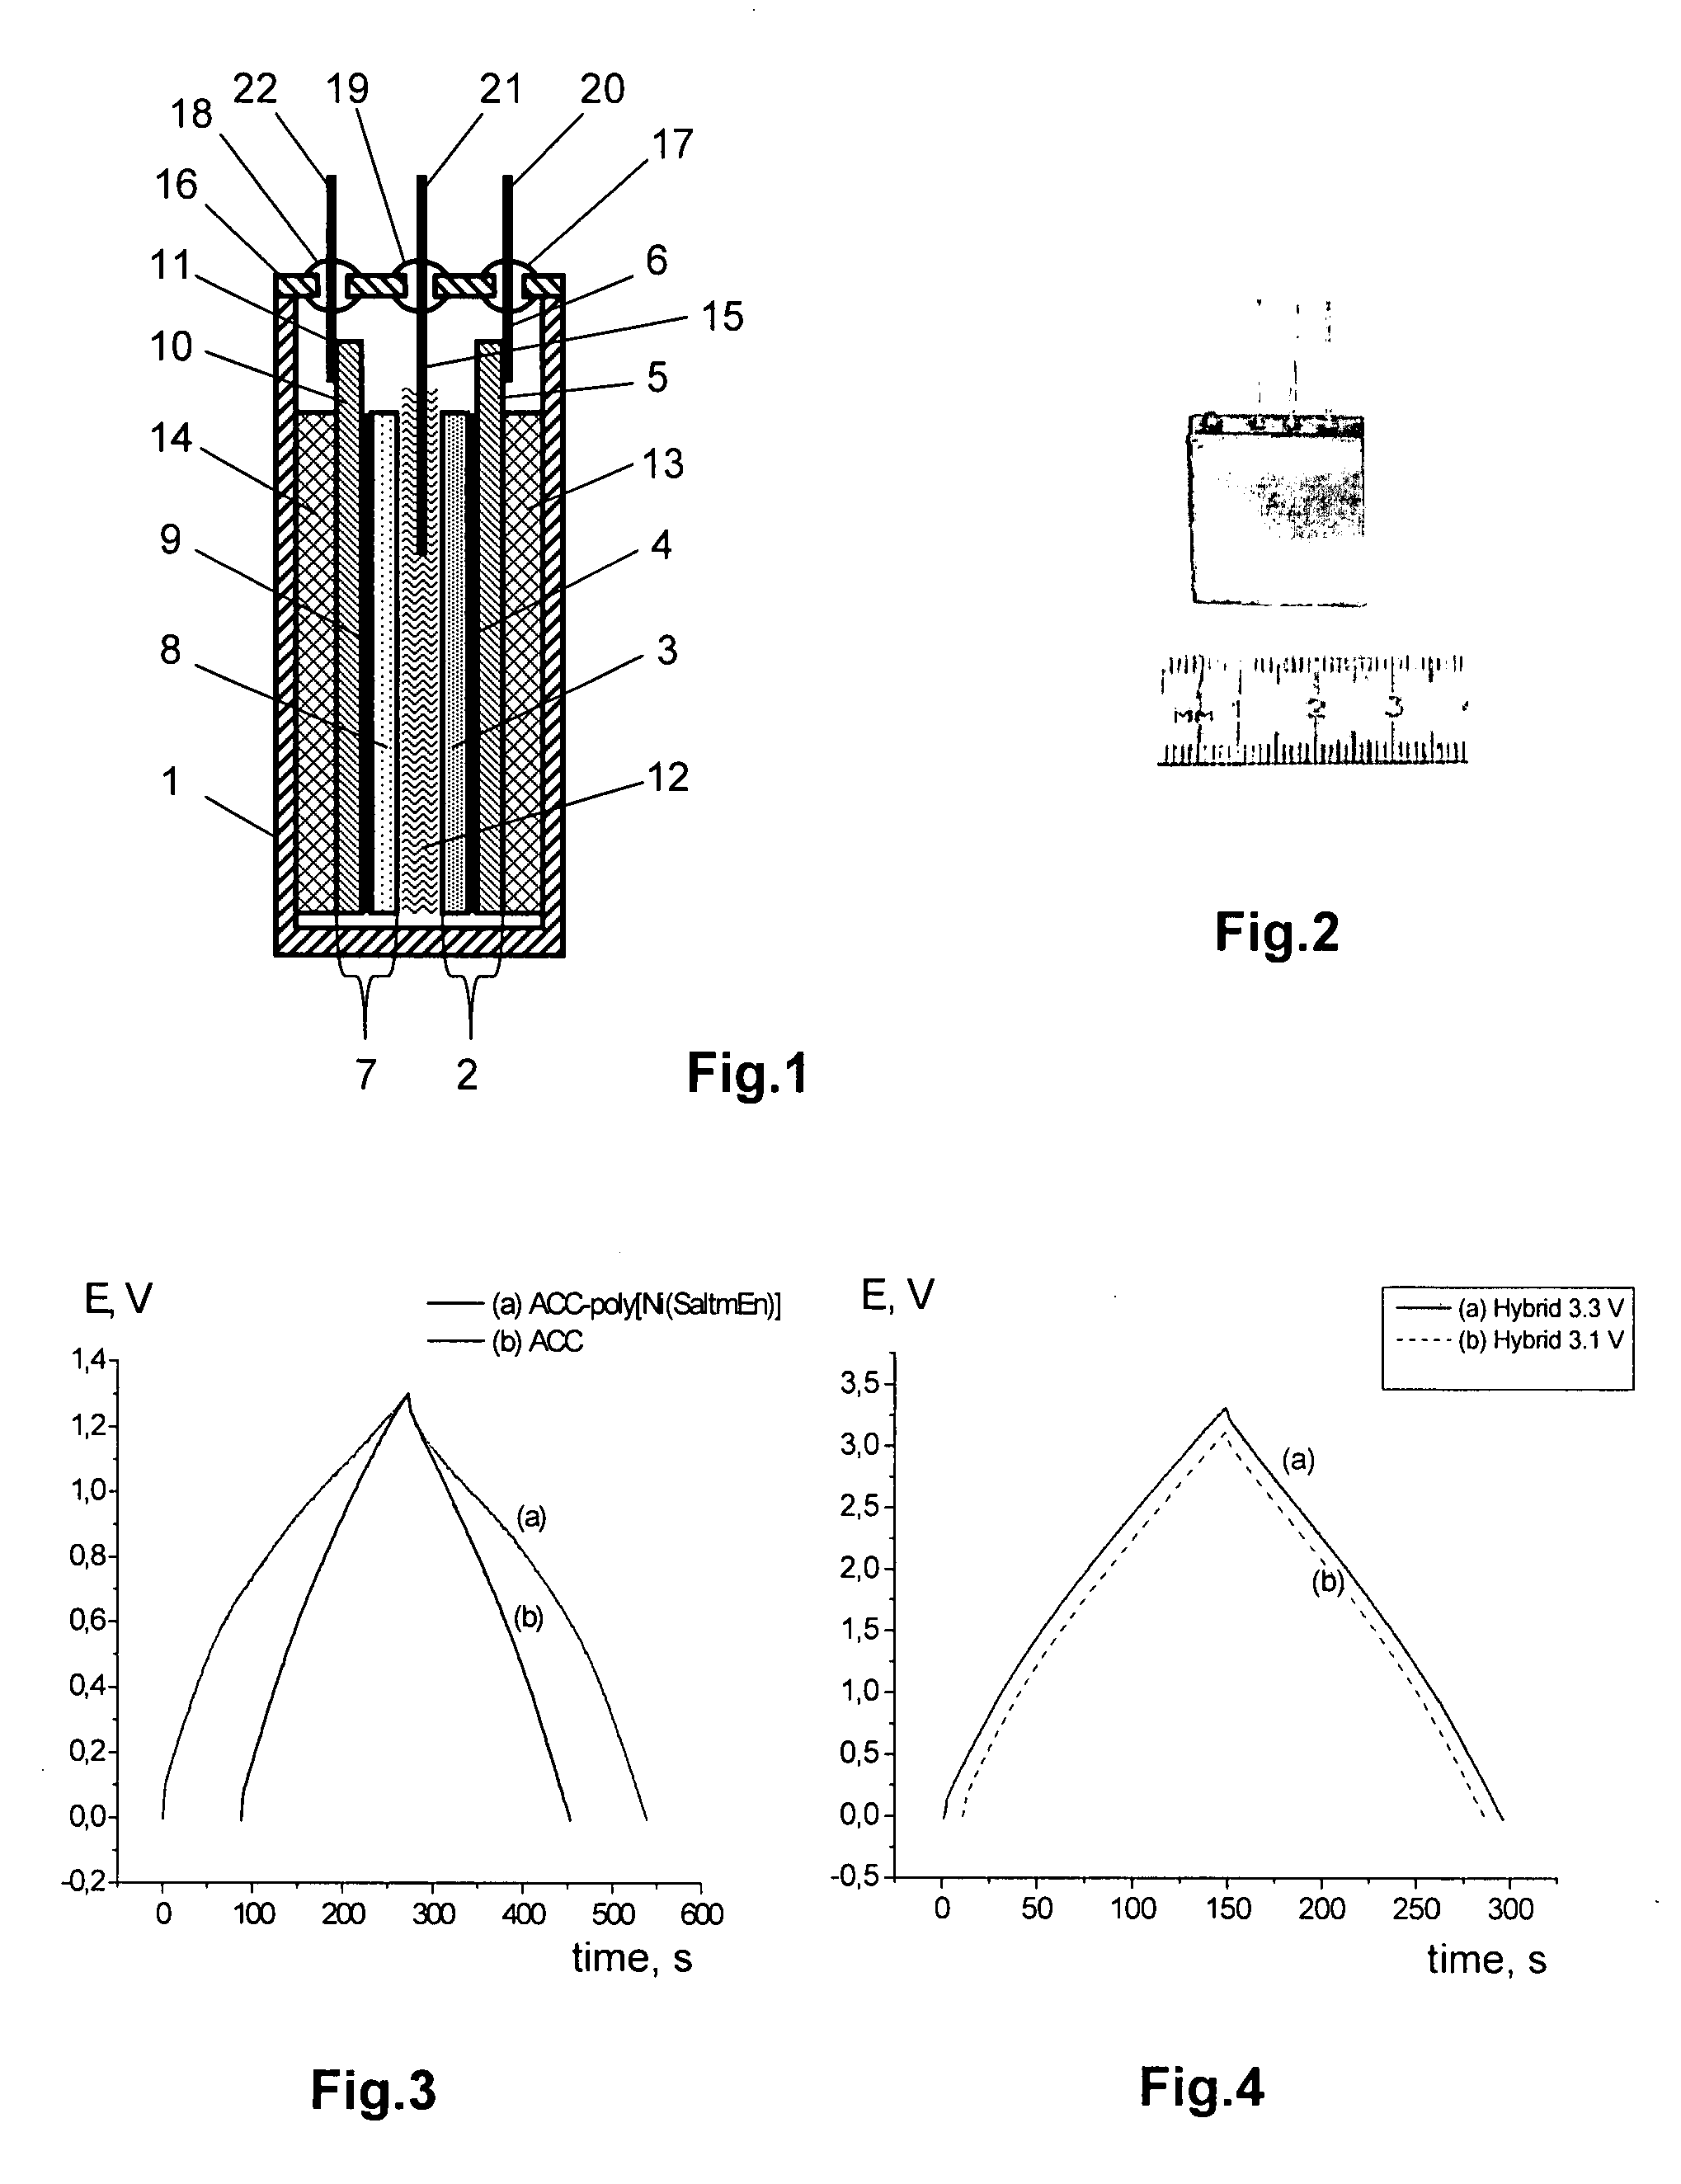 Method for manufacturing an energy storage device